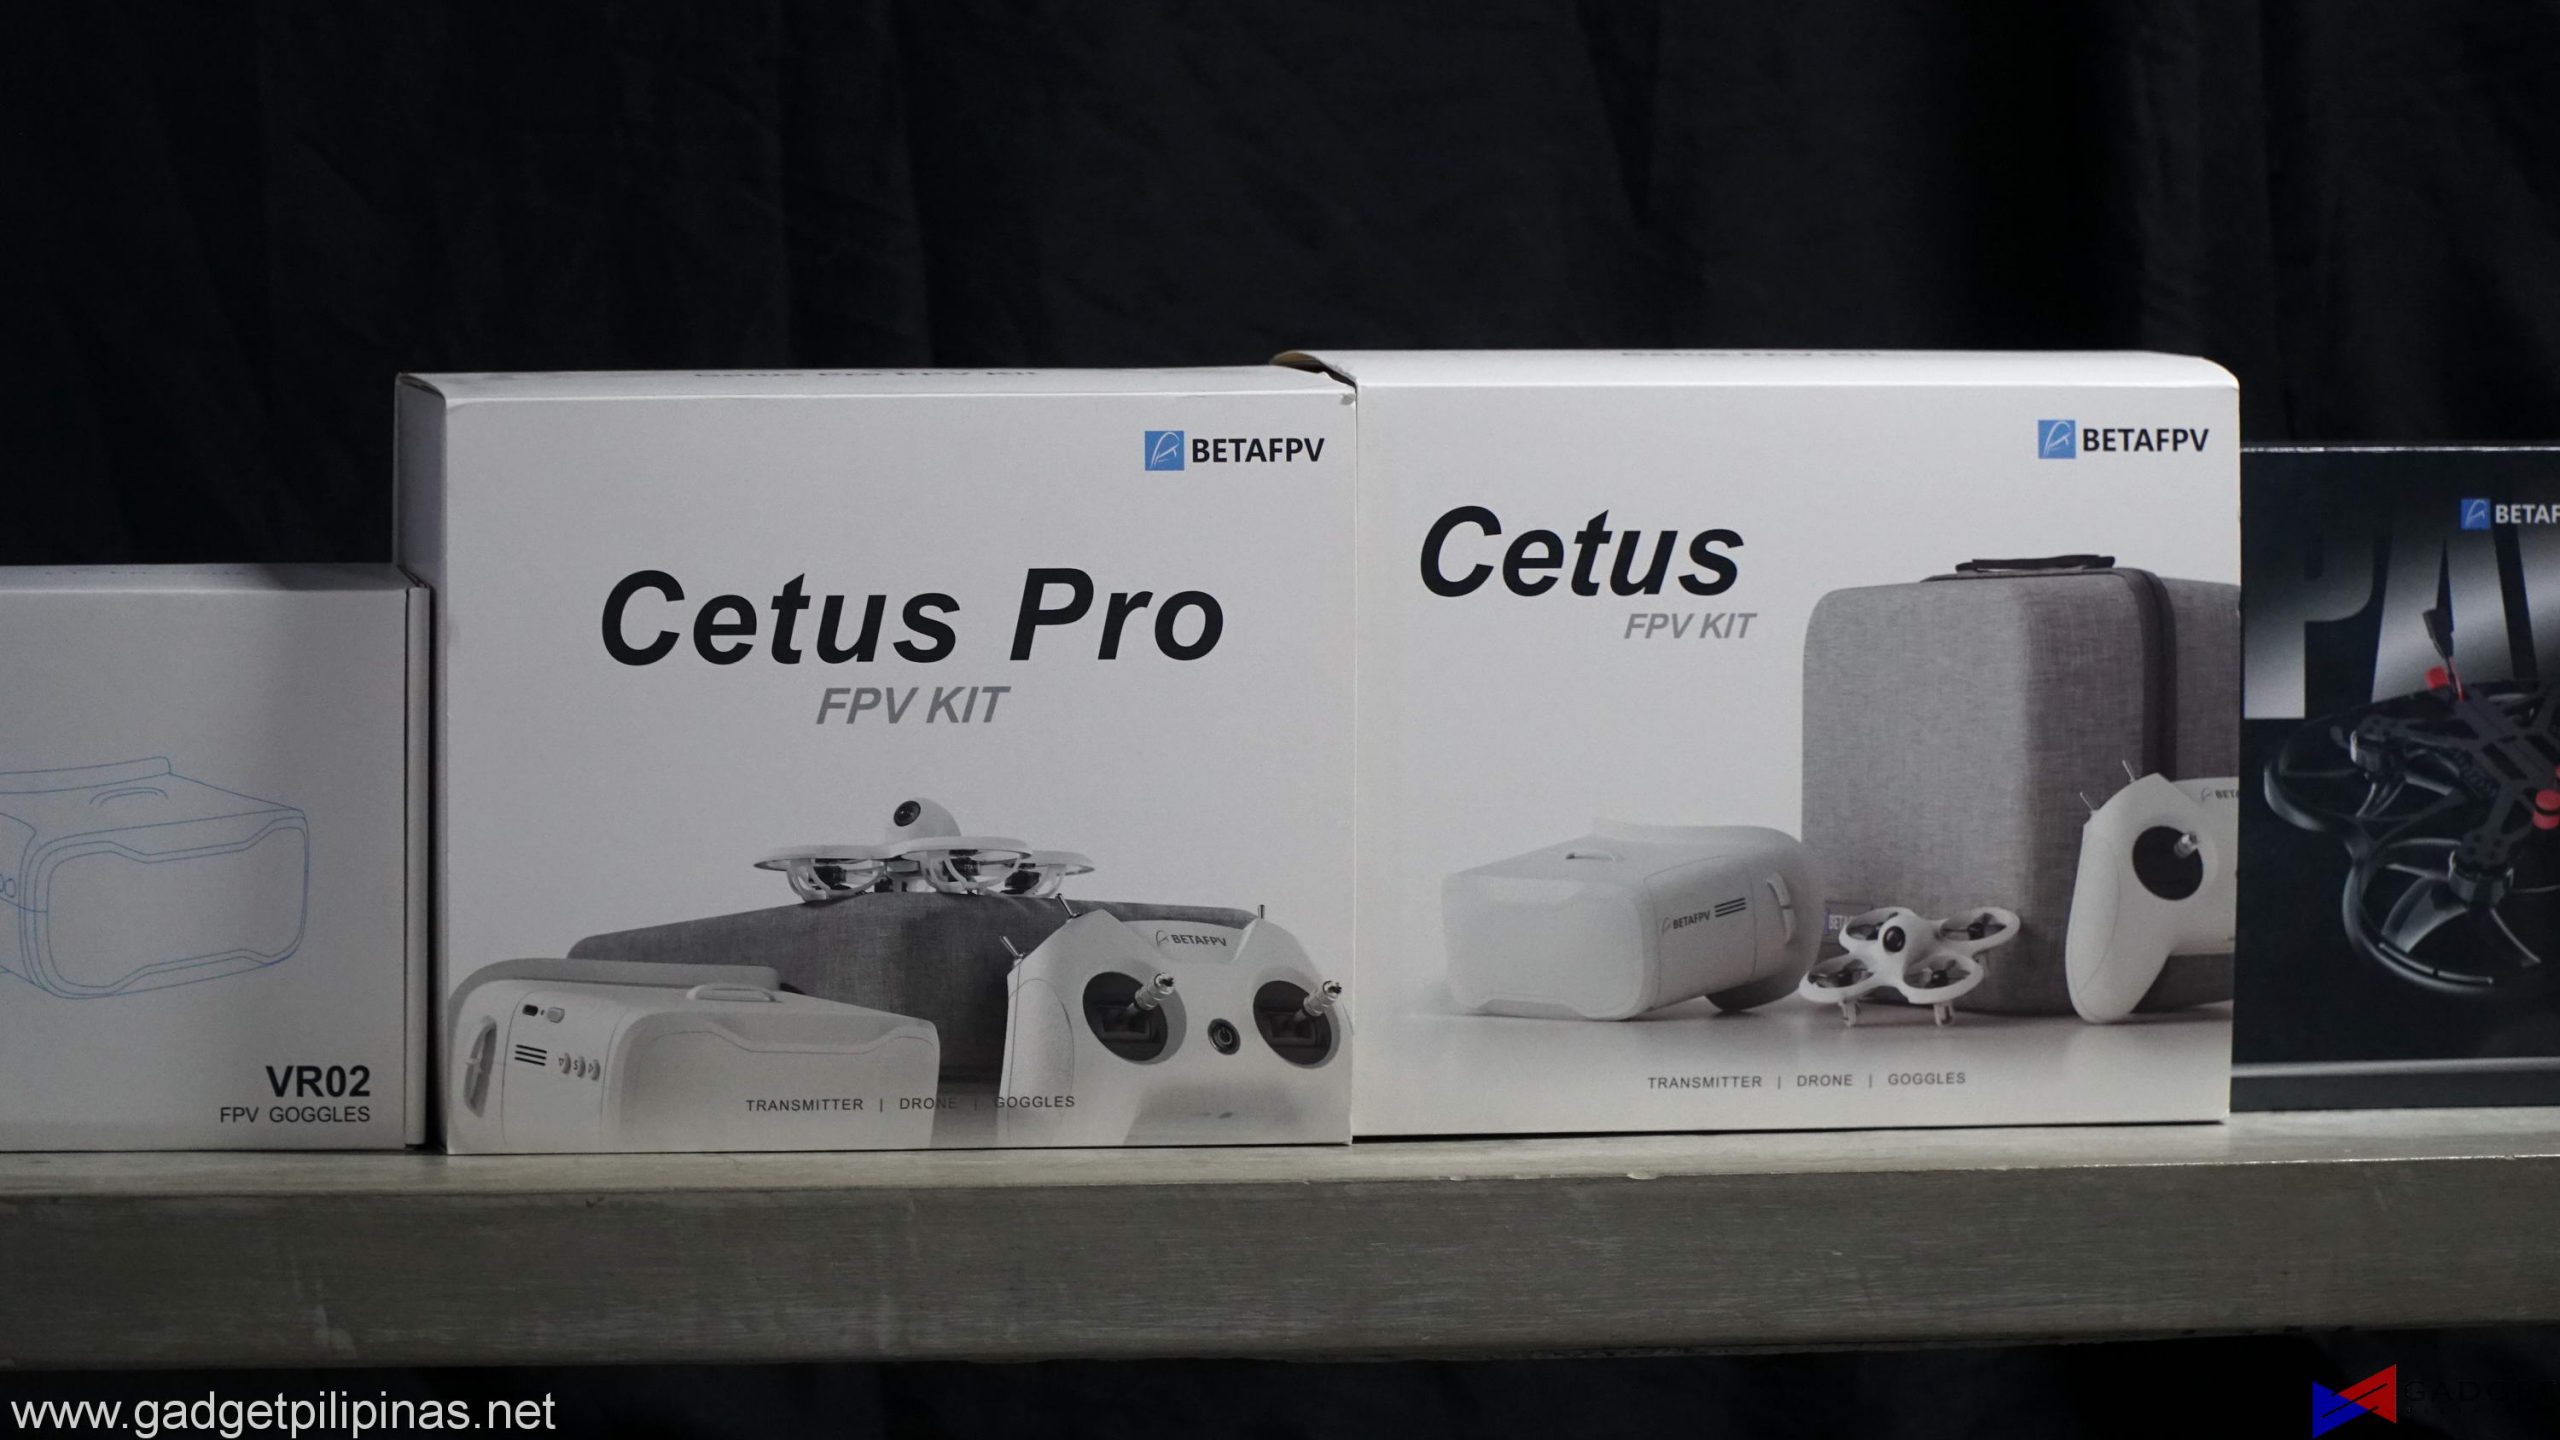 BETAFPV CETUS, CETUS PRO FPV Kits Launched in the Philippines, Priced